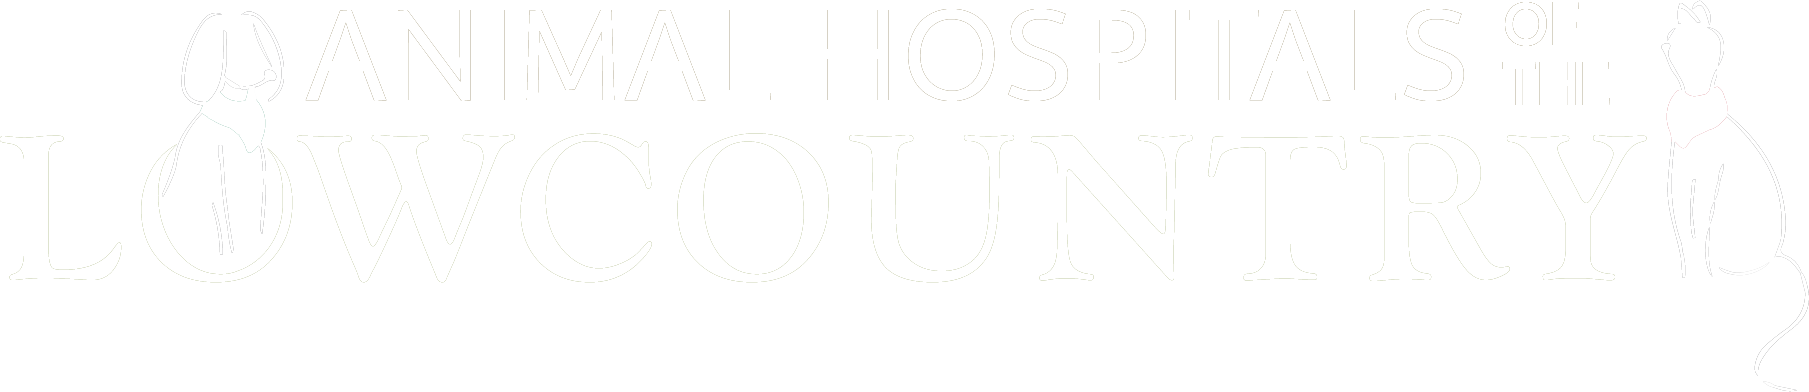 The image displays the phrase "vet hospitals of lowcountry" in large, lightly colored, upper-case letters with a shadow effect on an almost white background.